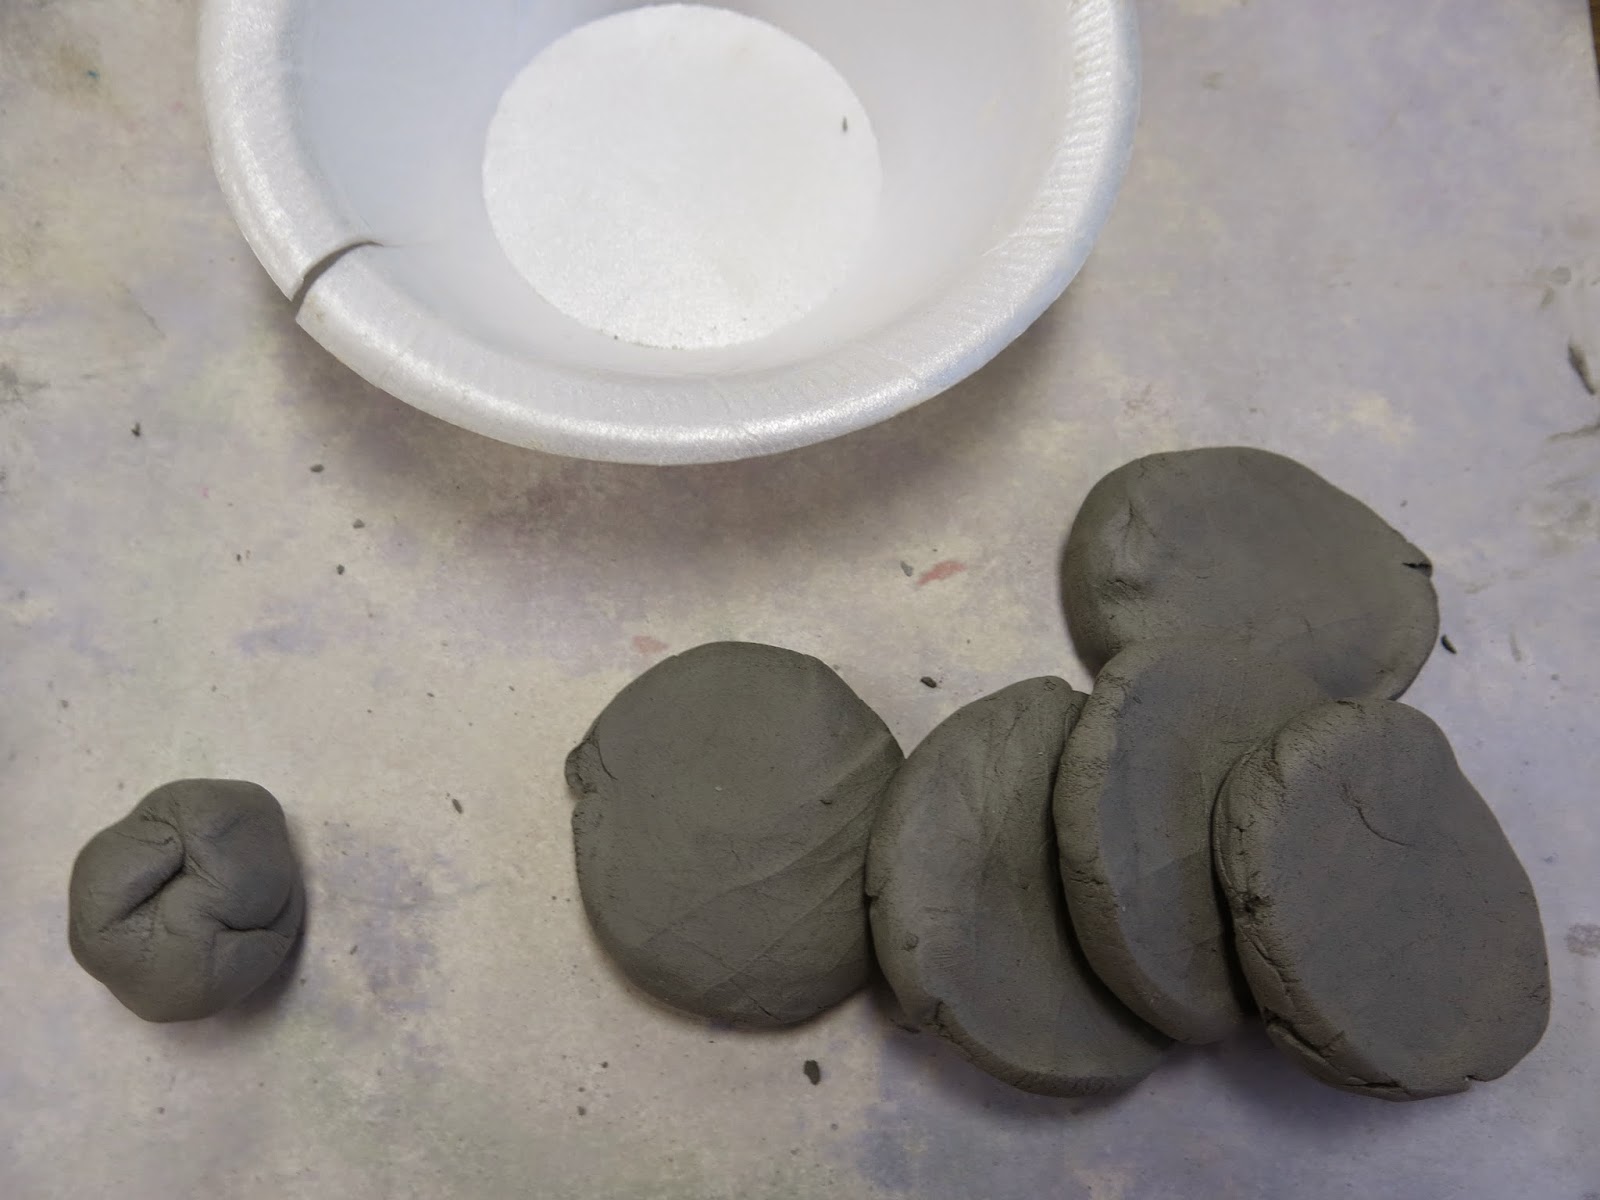 Cassie Stephens: In the Art Room: Ceramic Flowers with Third Grade